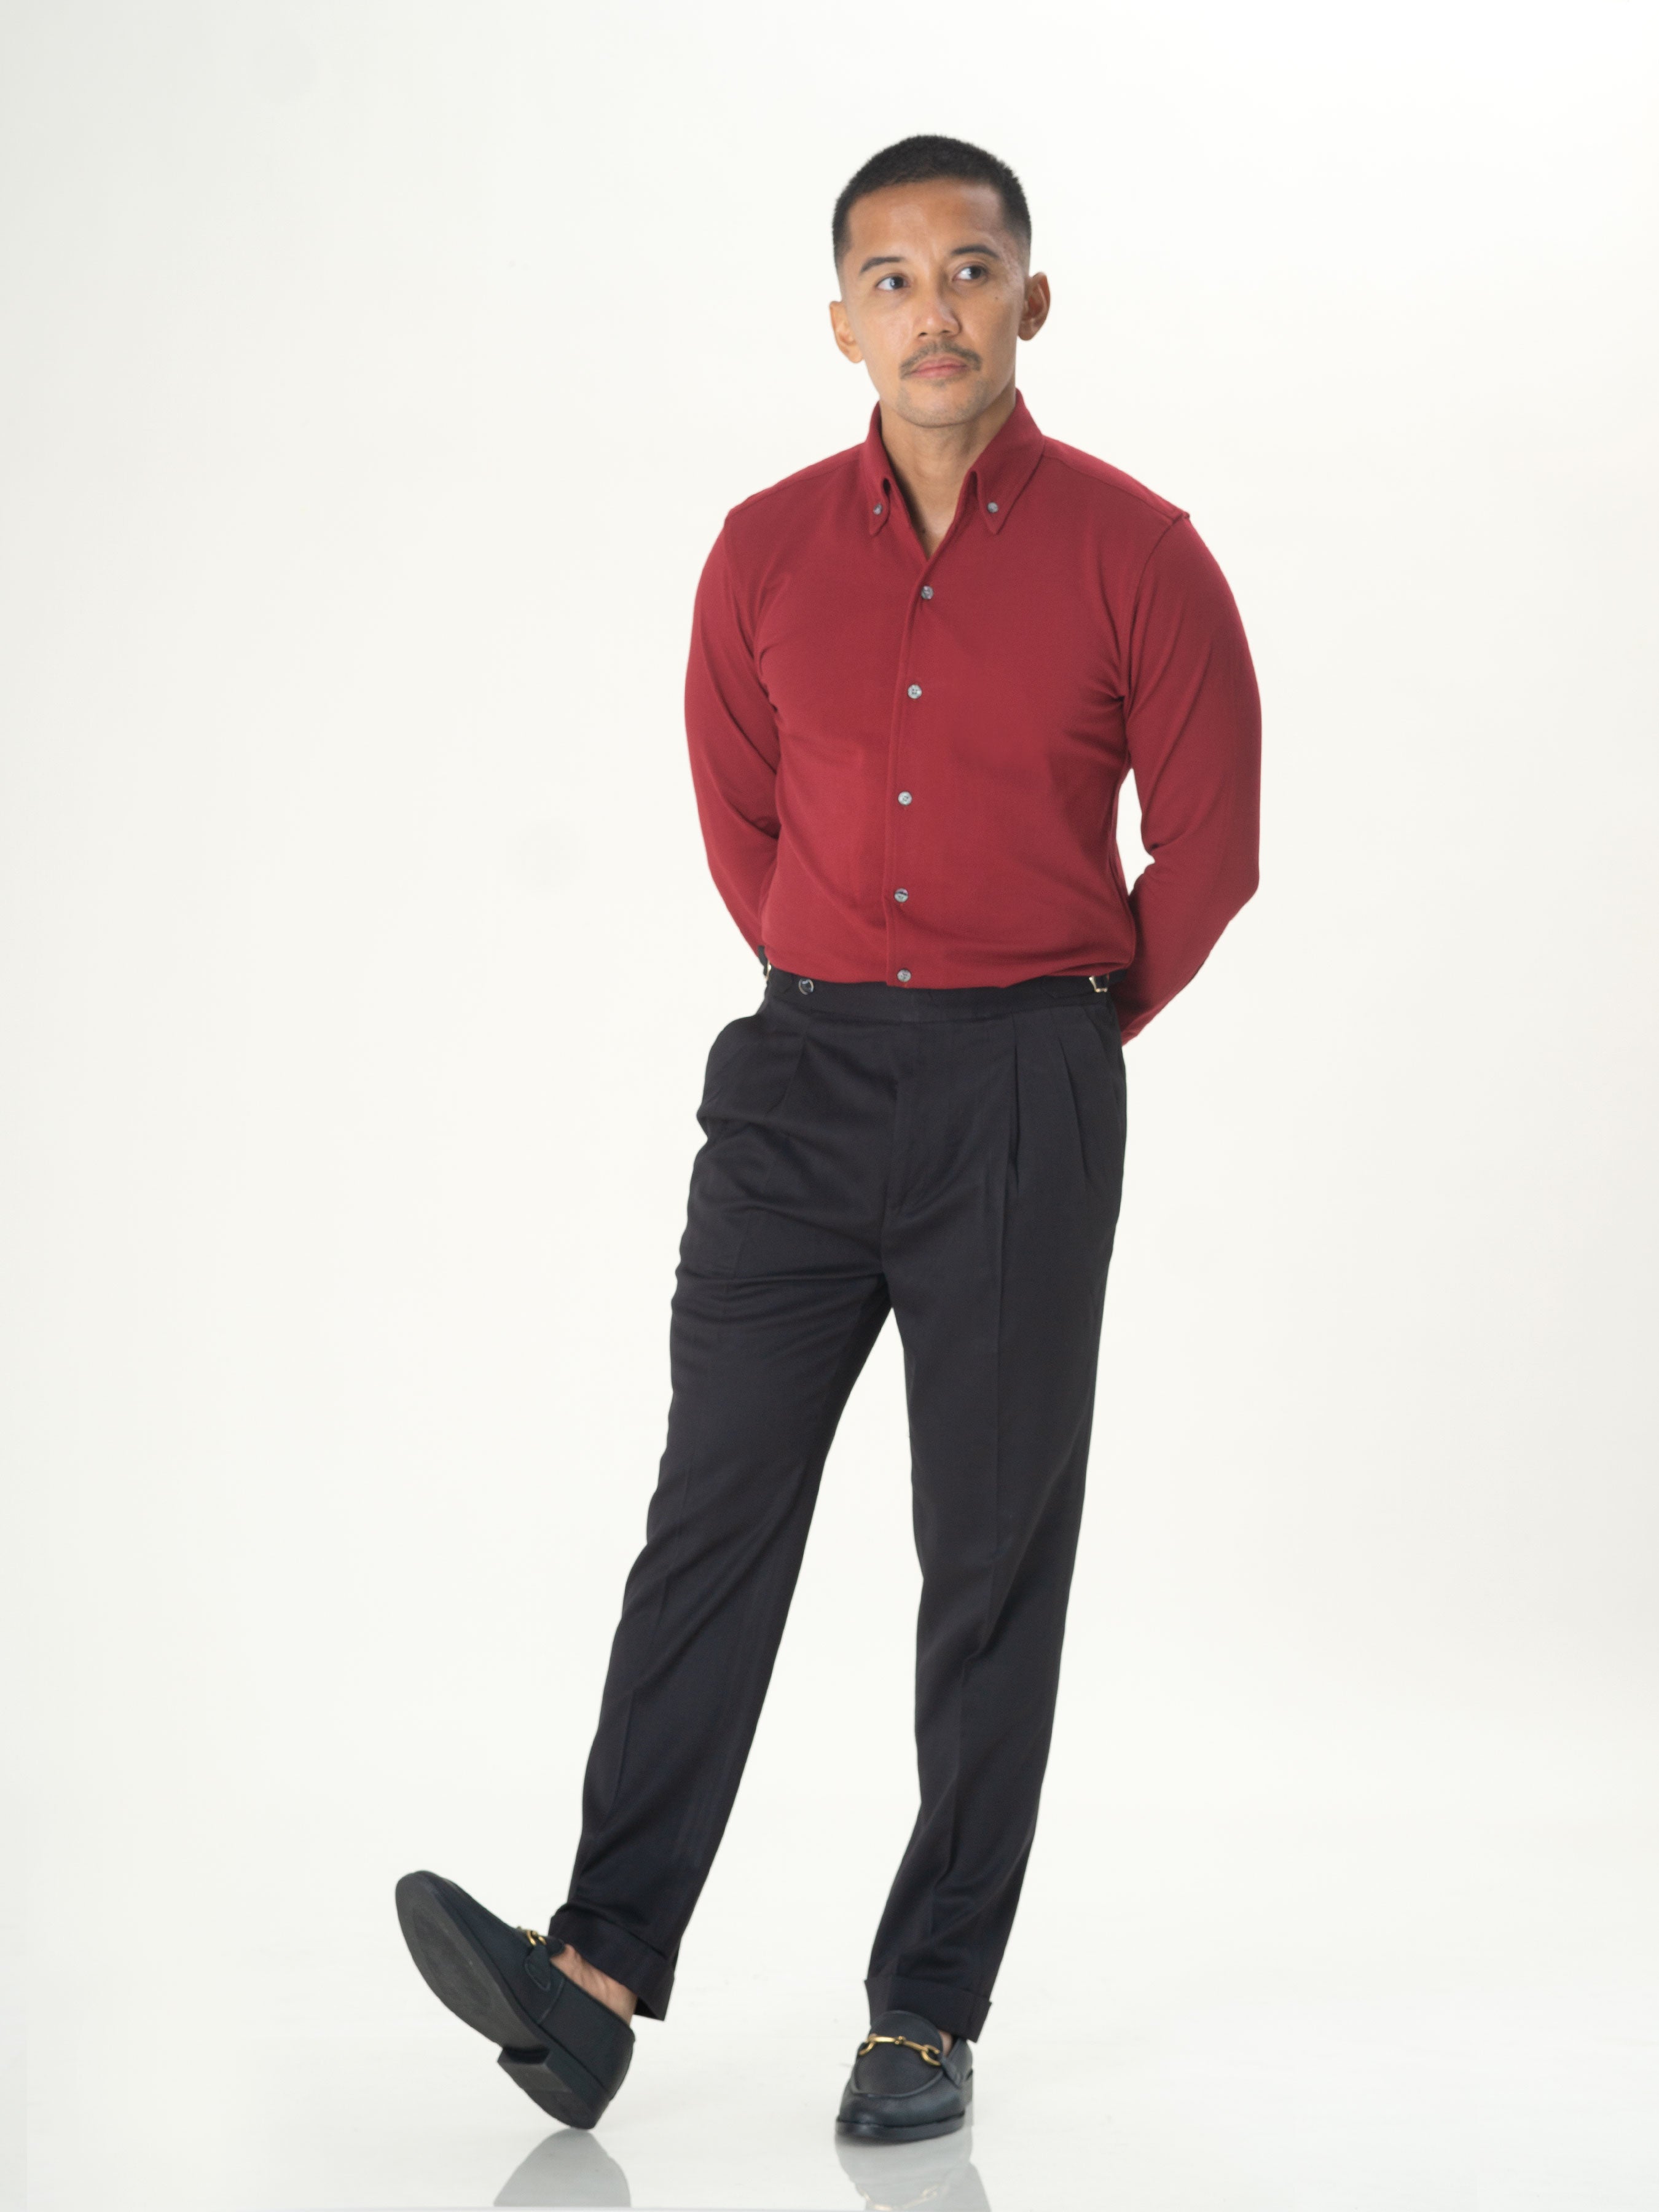 Long Sleeve Polo Shirt - Red Burgundy Button Down - Zeve Shoes